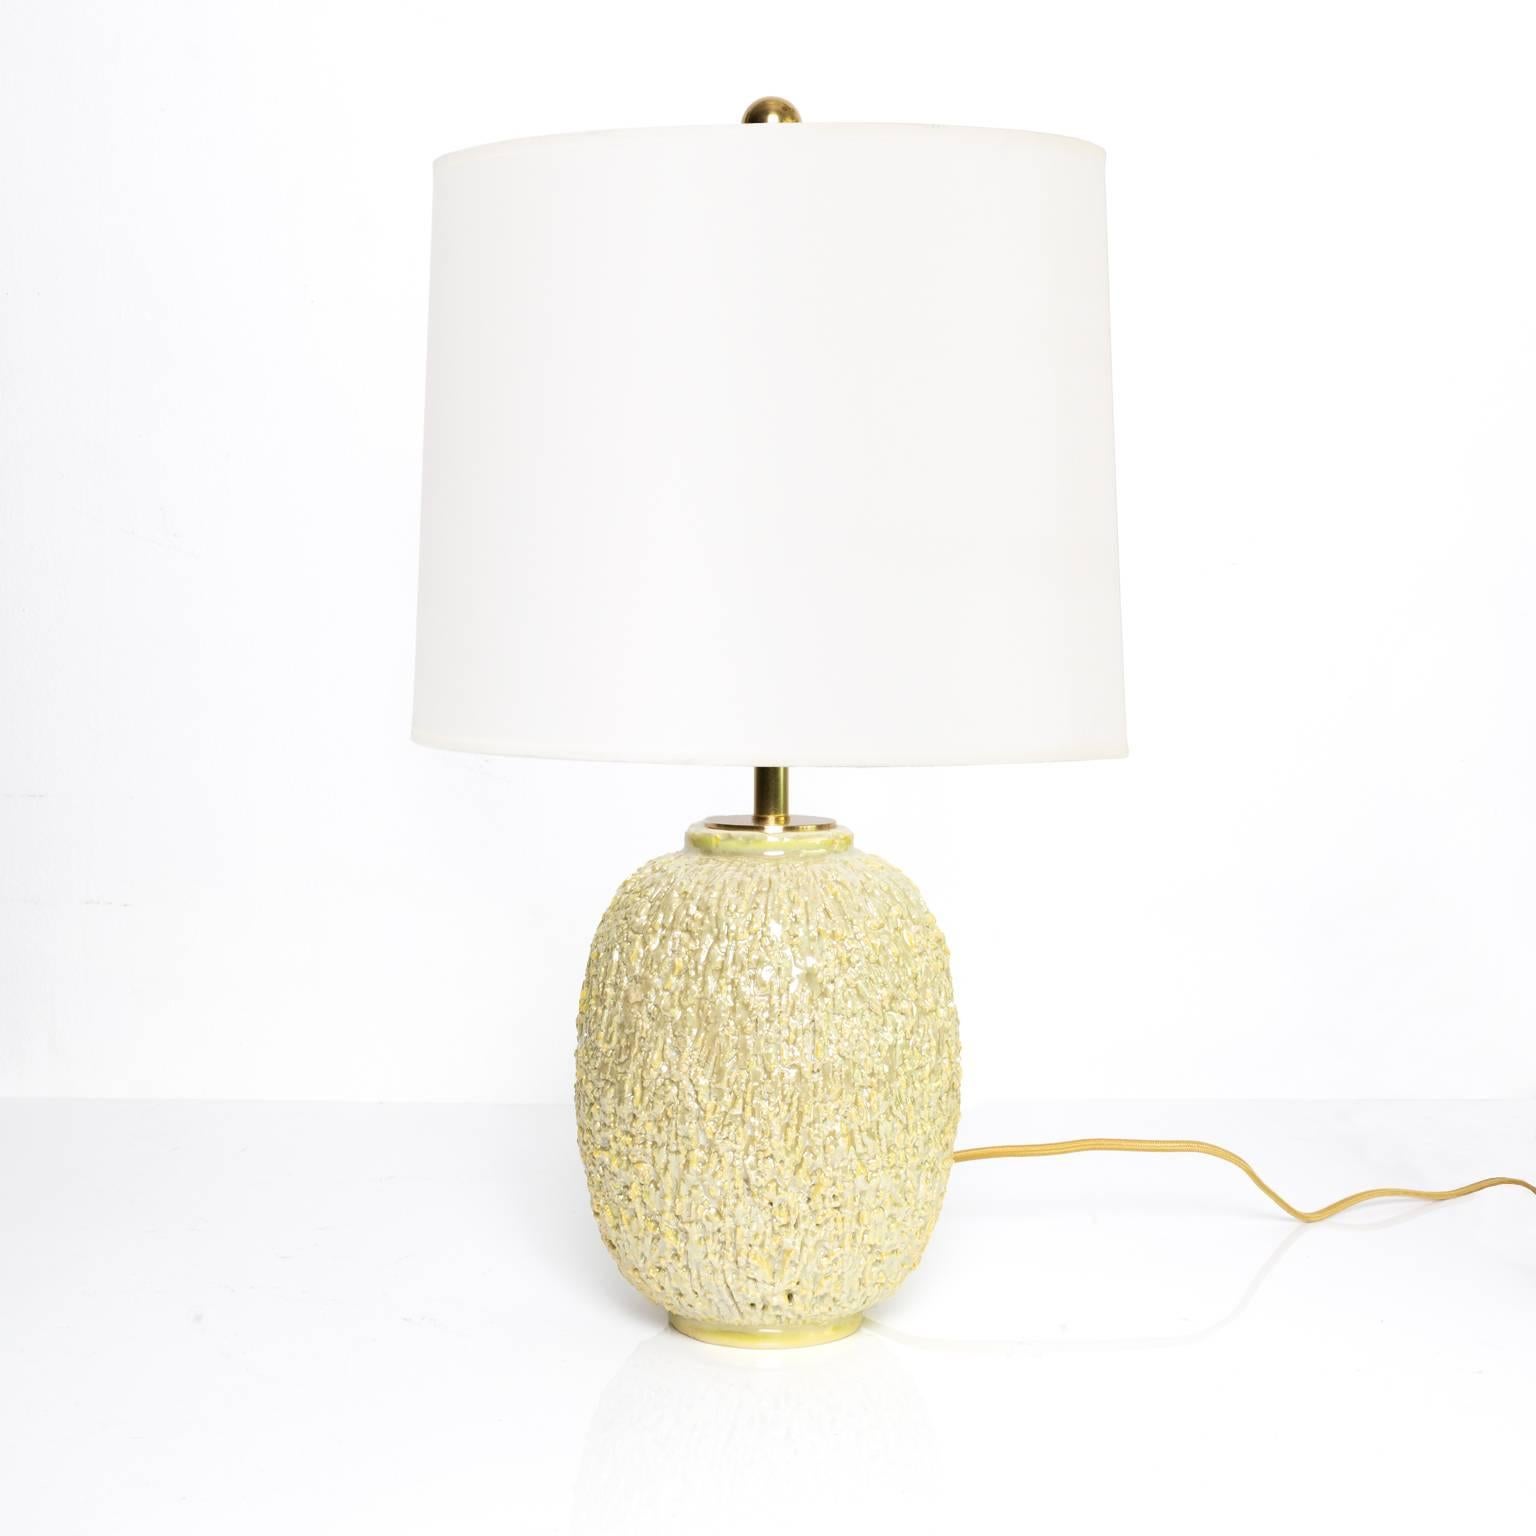 A highly textured surface Scandinavian Modern ceramic lamp by Gunnar Nylund for Rörstrand, Sweden. The lamp is made of chamotte clay and finished with a cream colored luster glaze. New all brass hardware including a double standard bulb socket